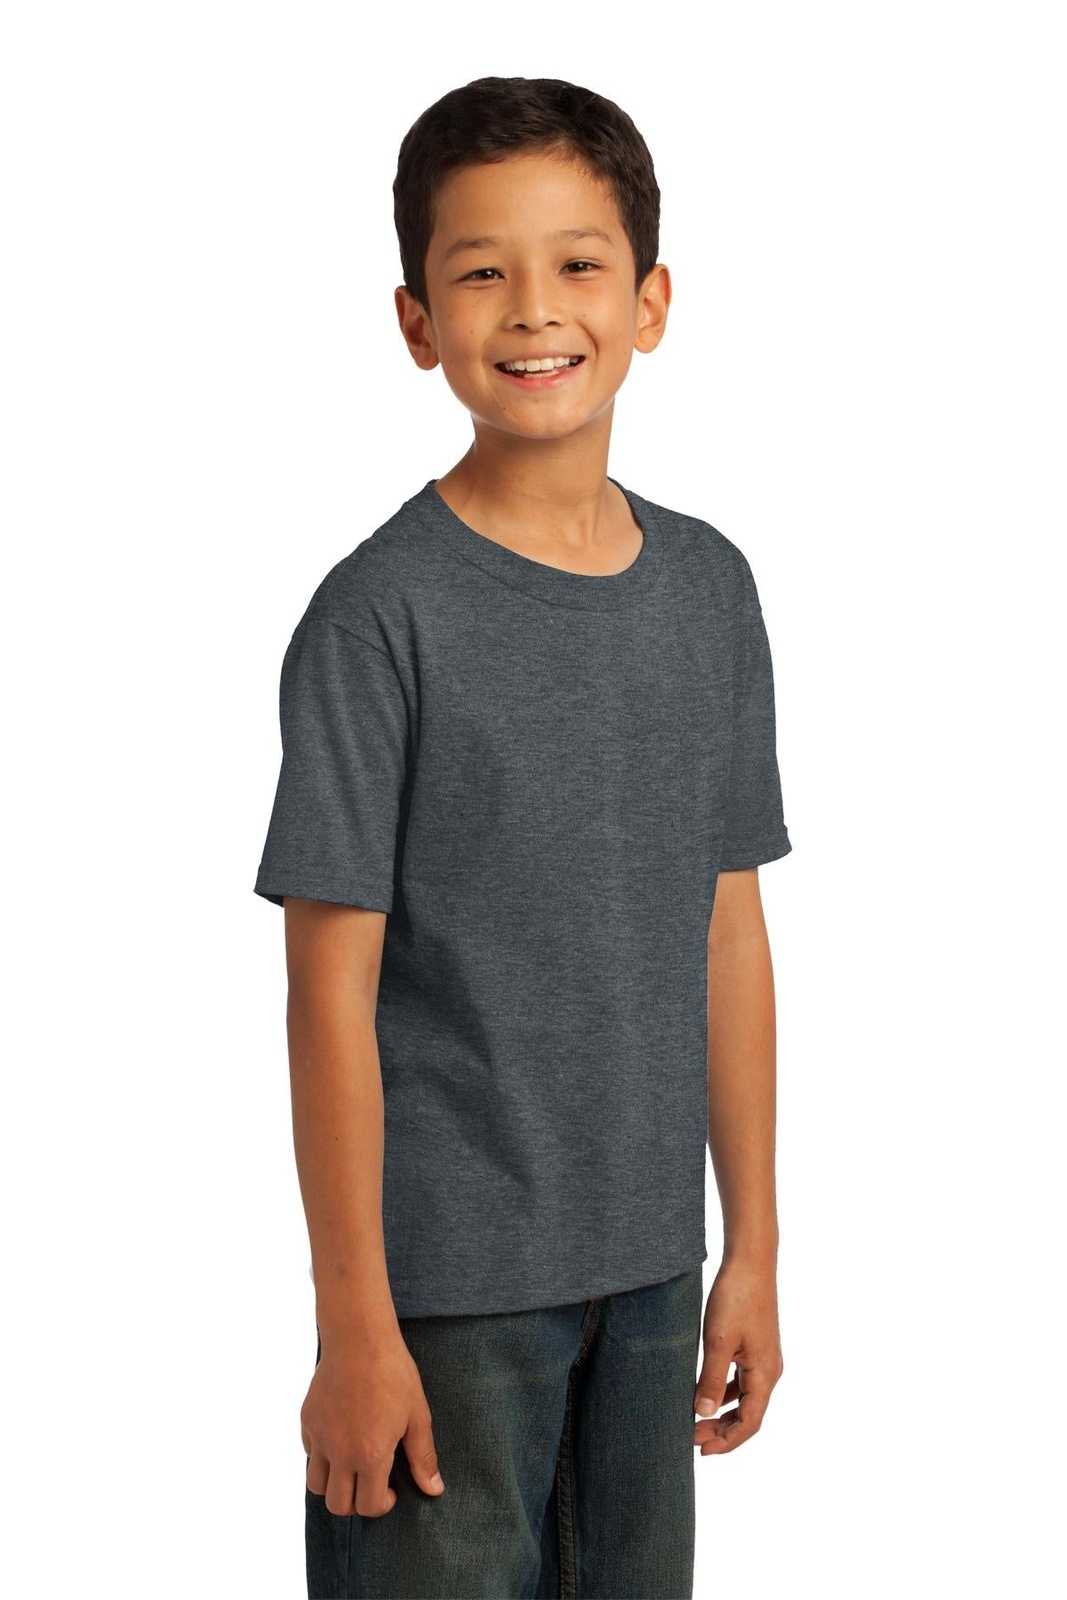 Fruit of the Loom 3930B Youth HD Cotton 100% Cotton T-Shirt - Black Heather - HIT a Double